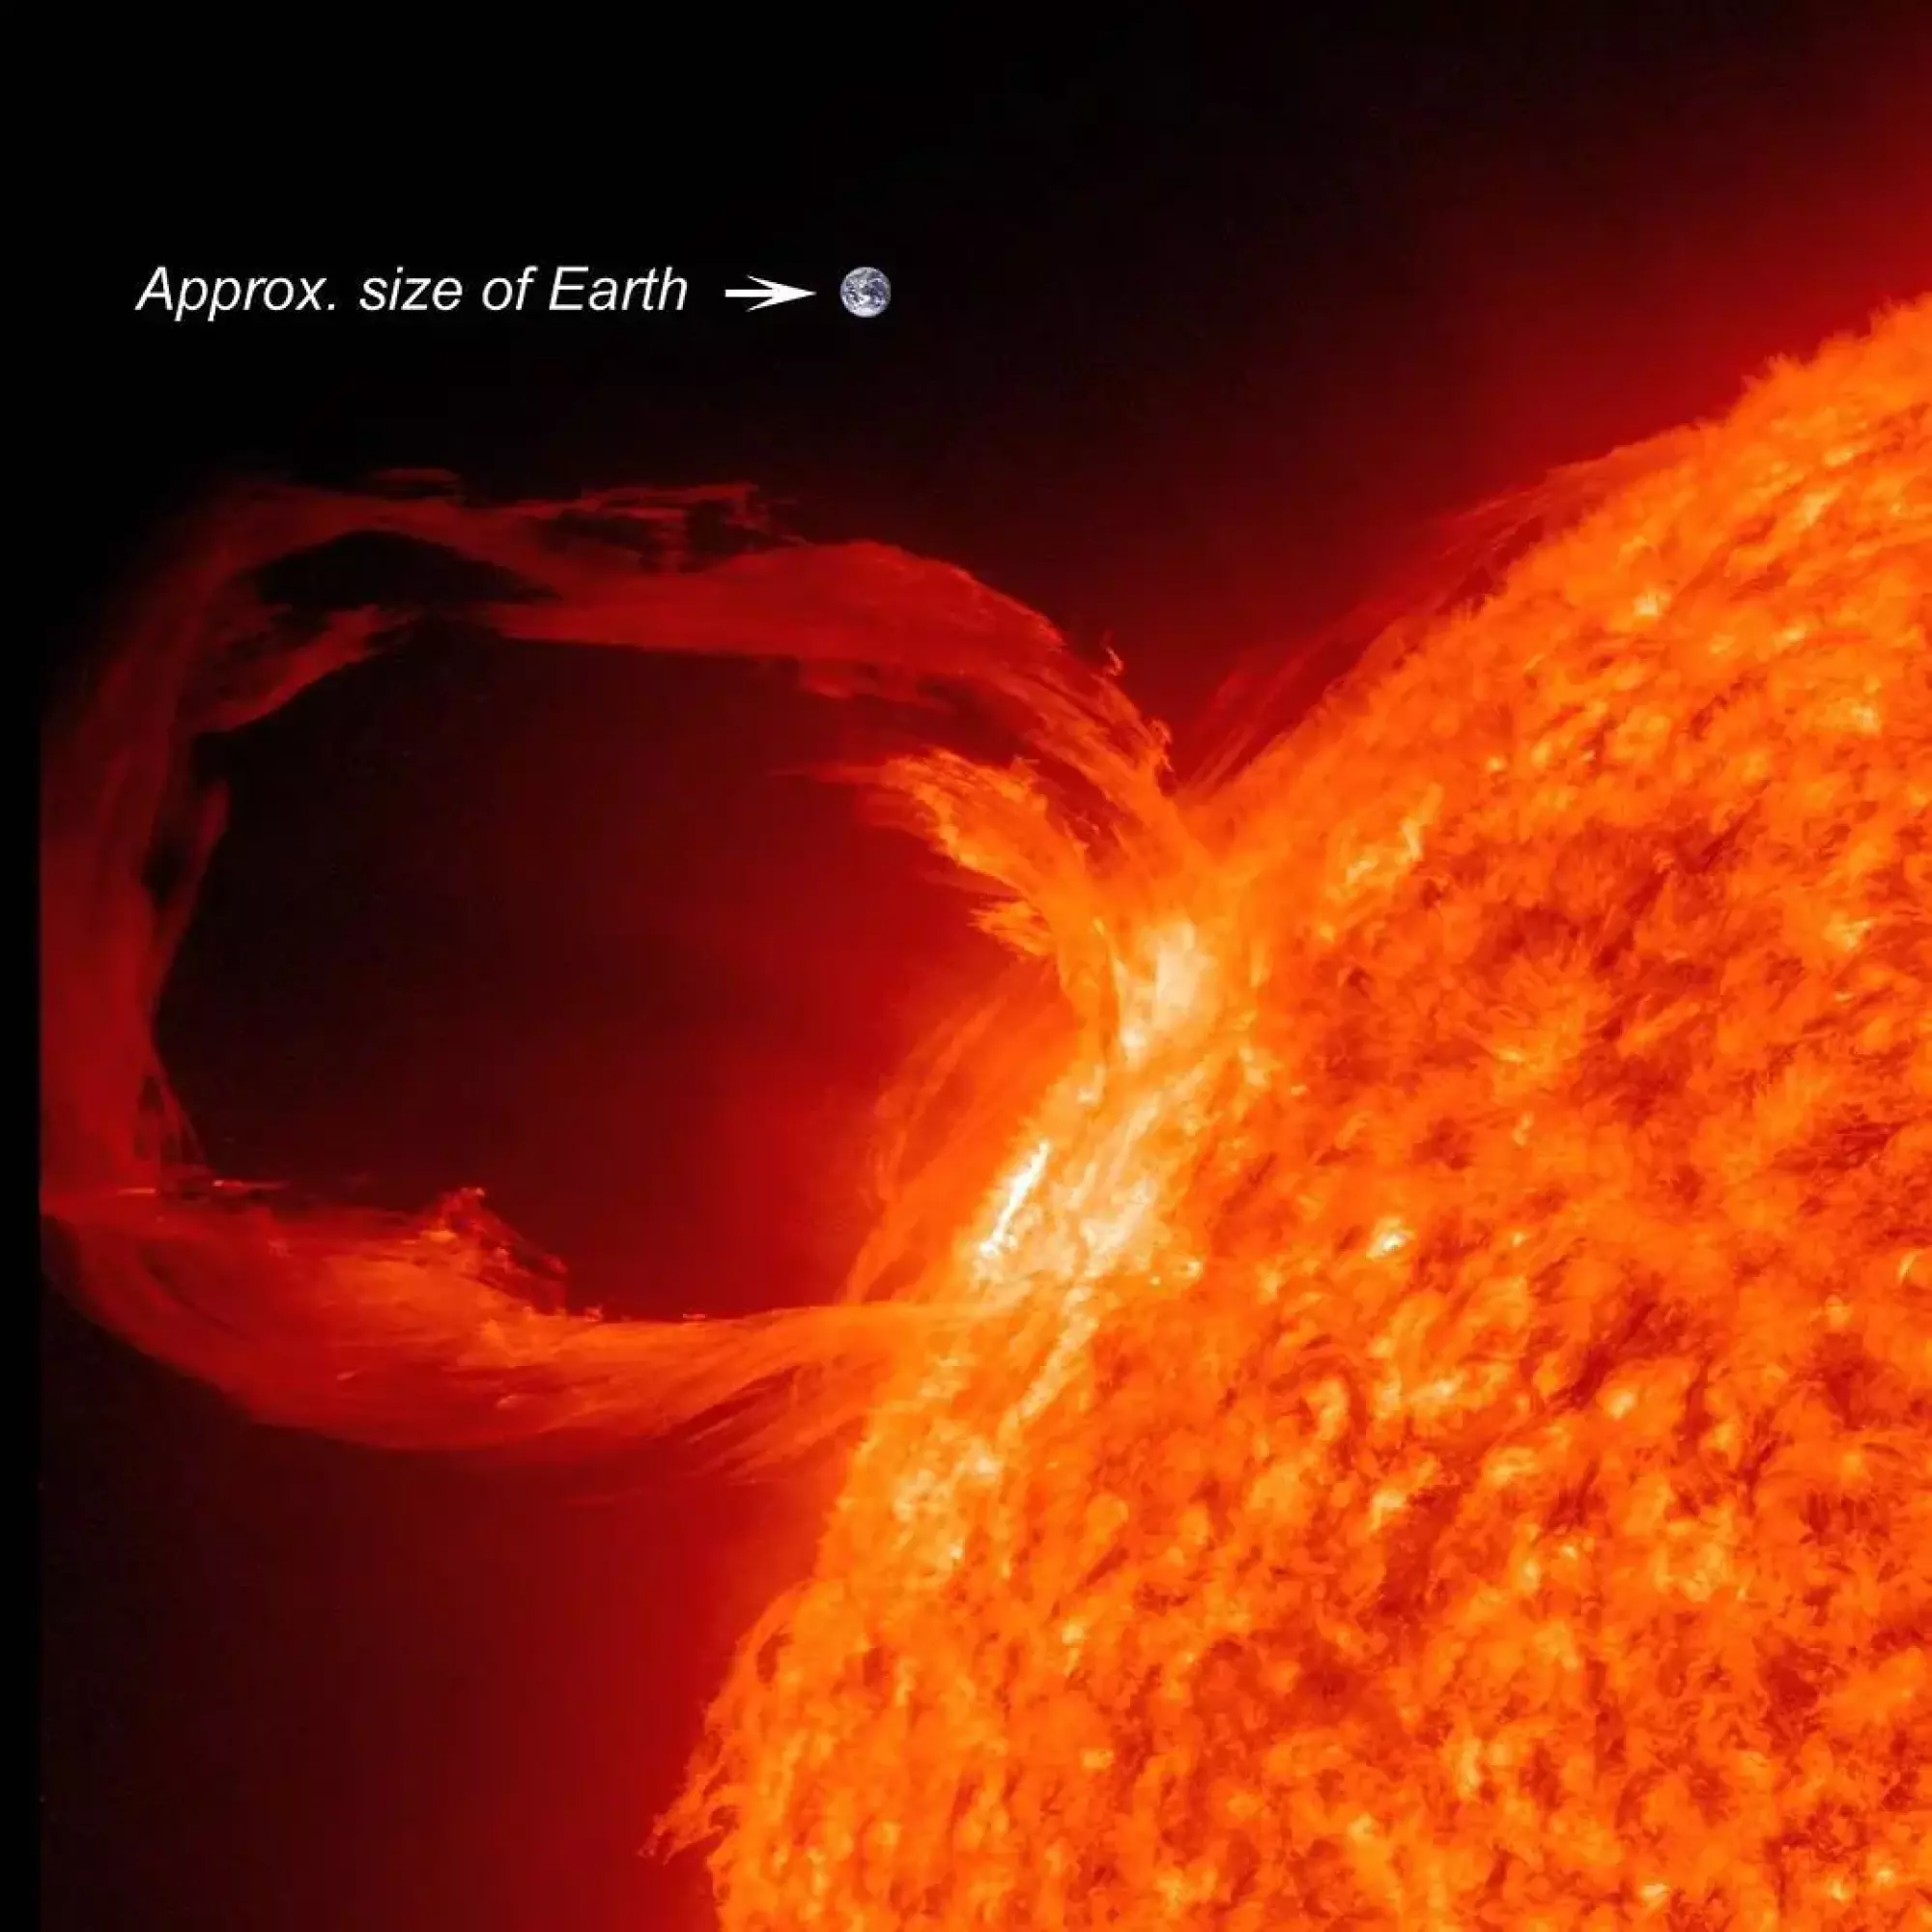 A solar prominence launching from the solar surface